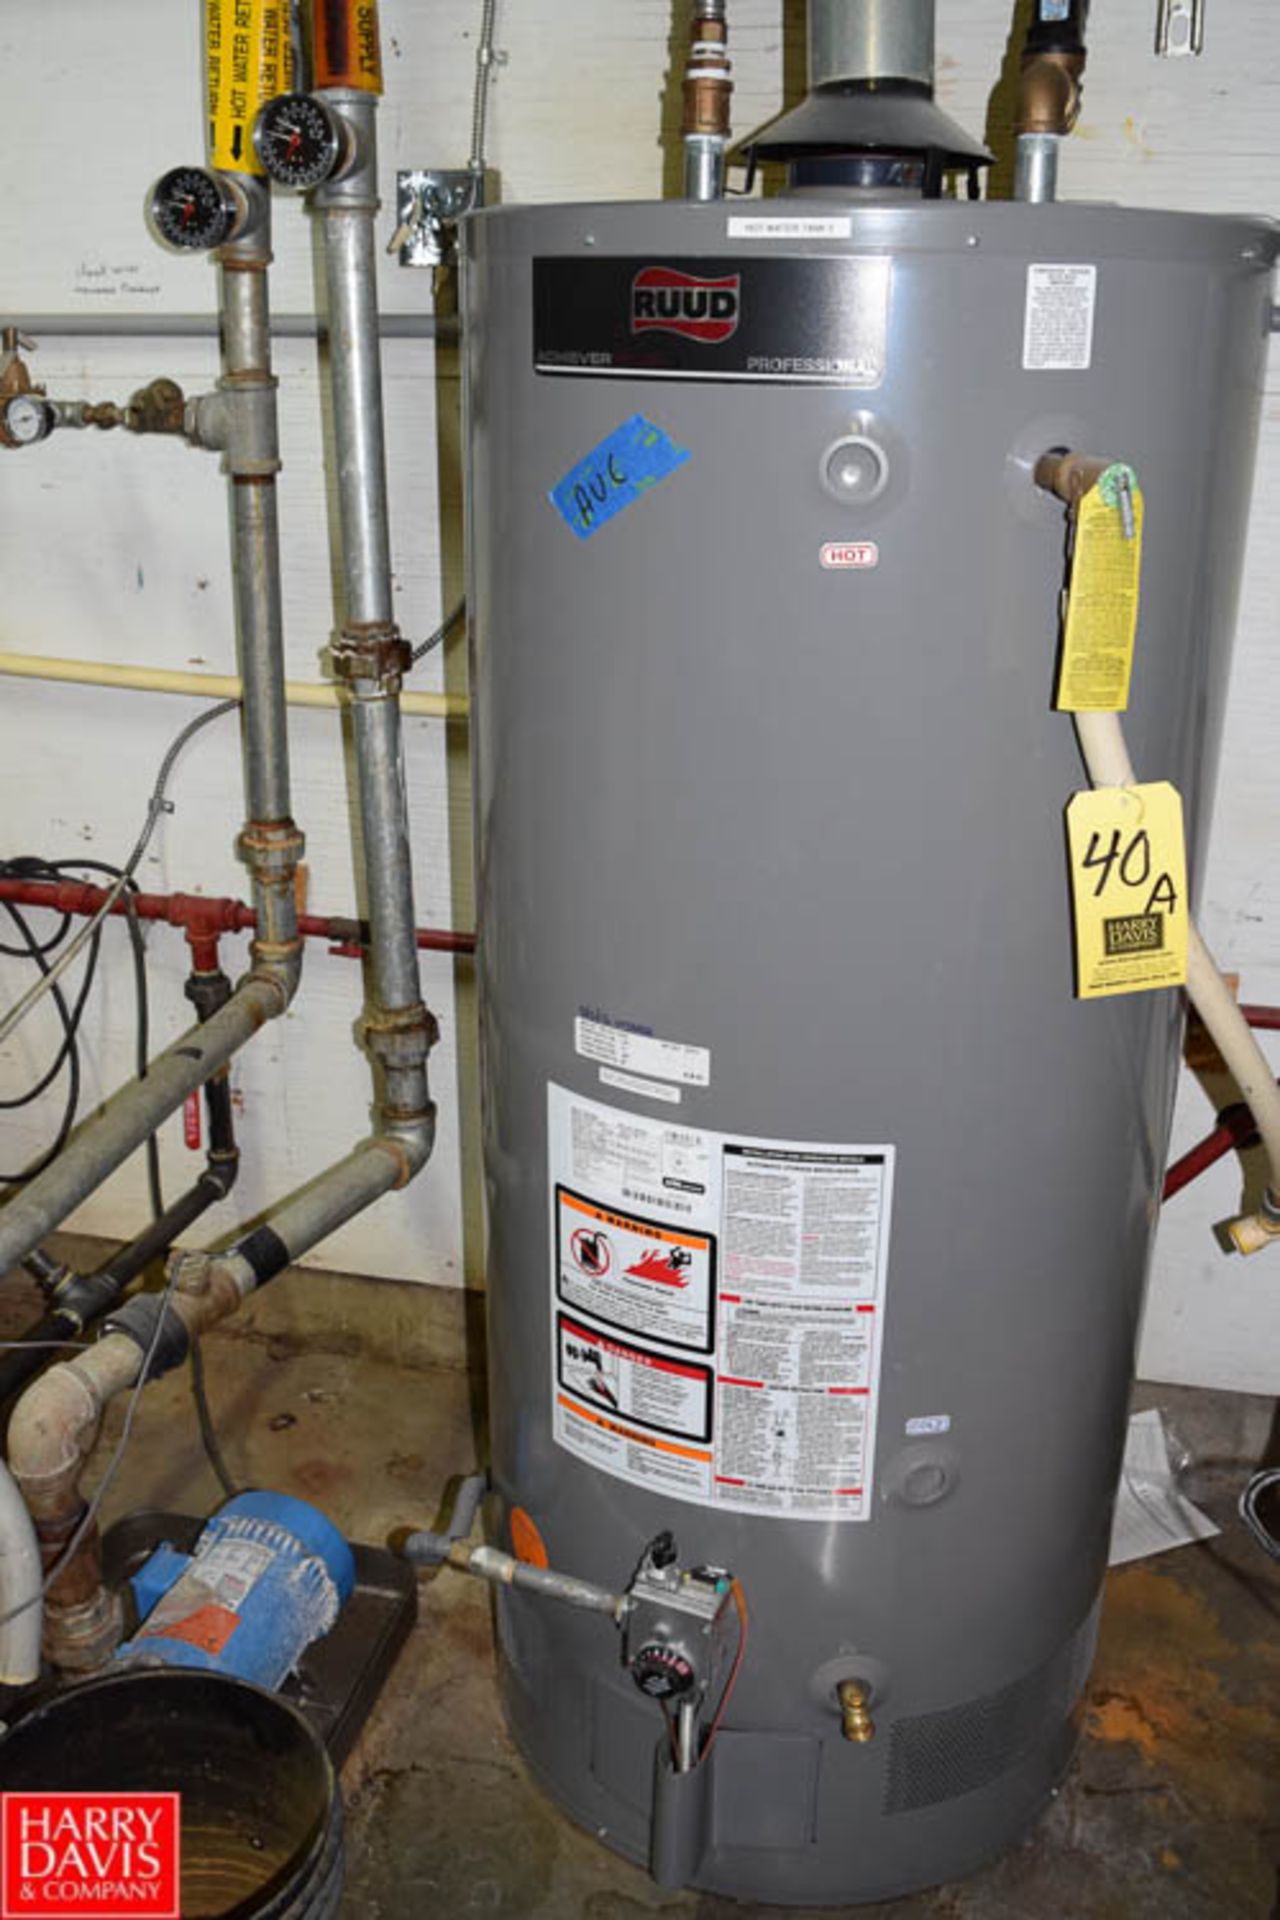 Ruud 75 Gallon Gas-Fired Hot Water Tank- Rigging Fee: $75